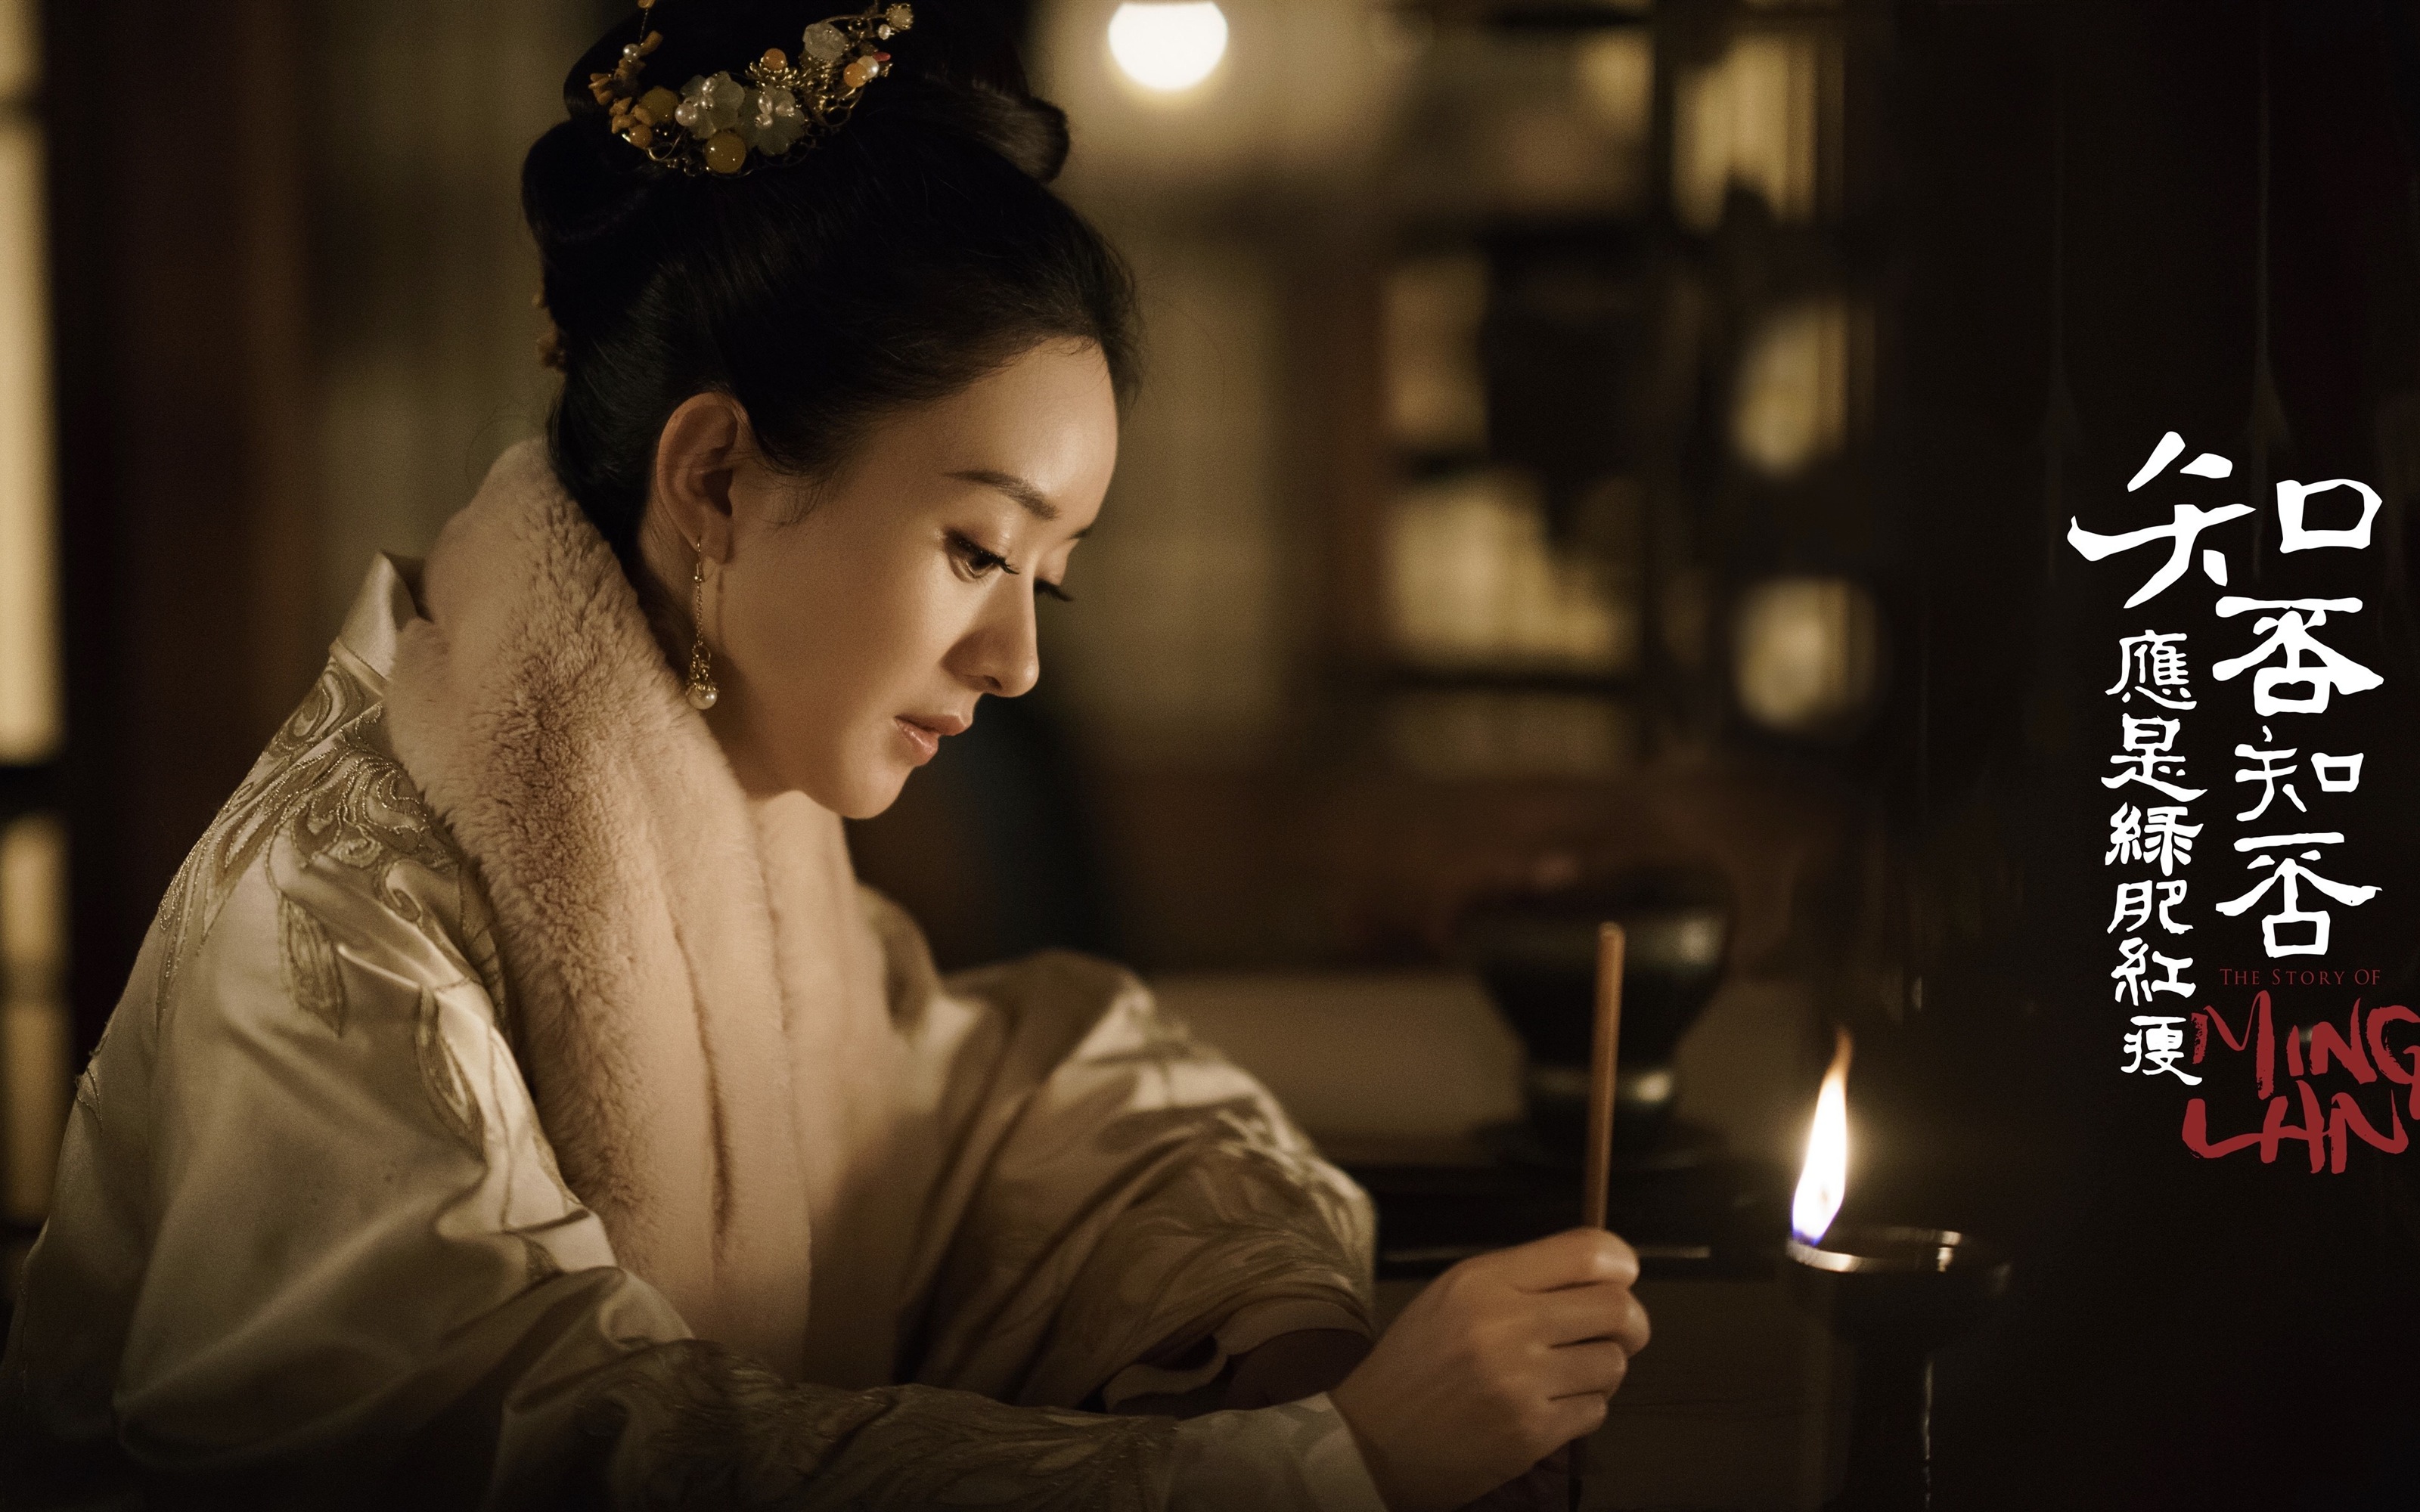 The Story Of MingLan, TV series HD wallpapers #26 - 3200x2000